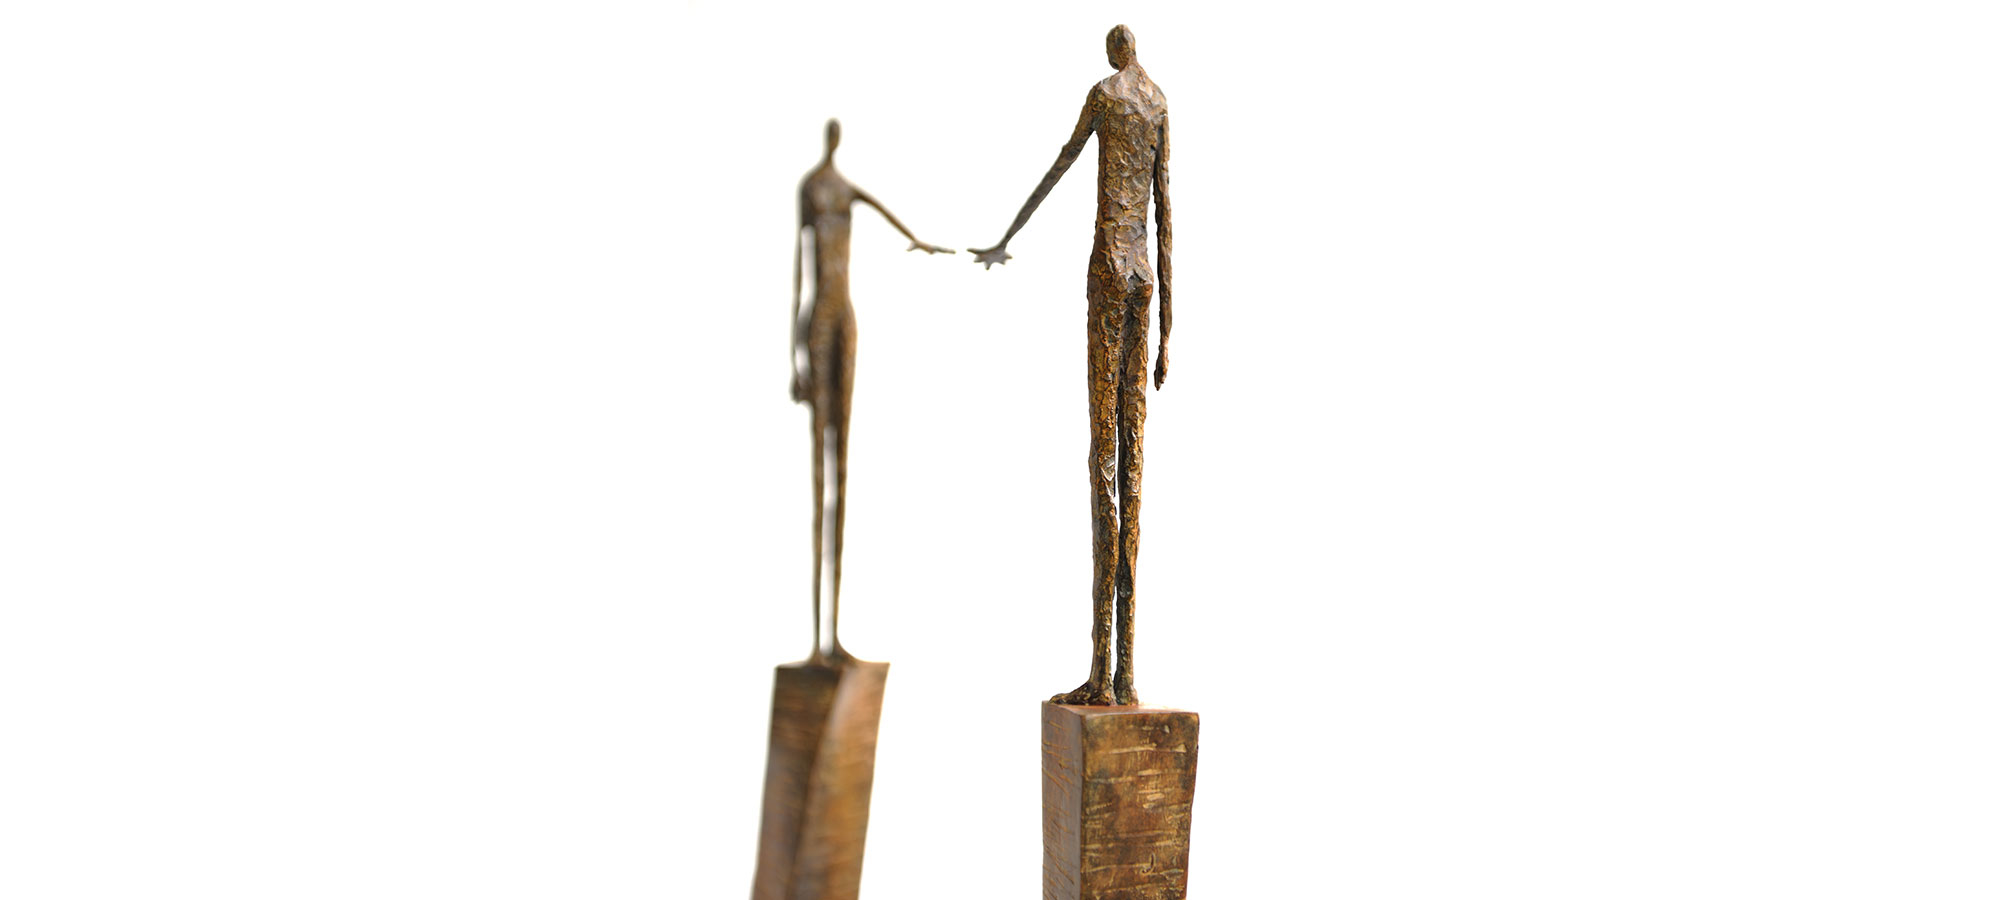 Finding soul mate by French sculptor Val - Valérie Goutard - with Sculptureval